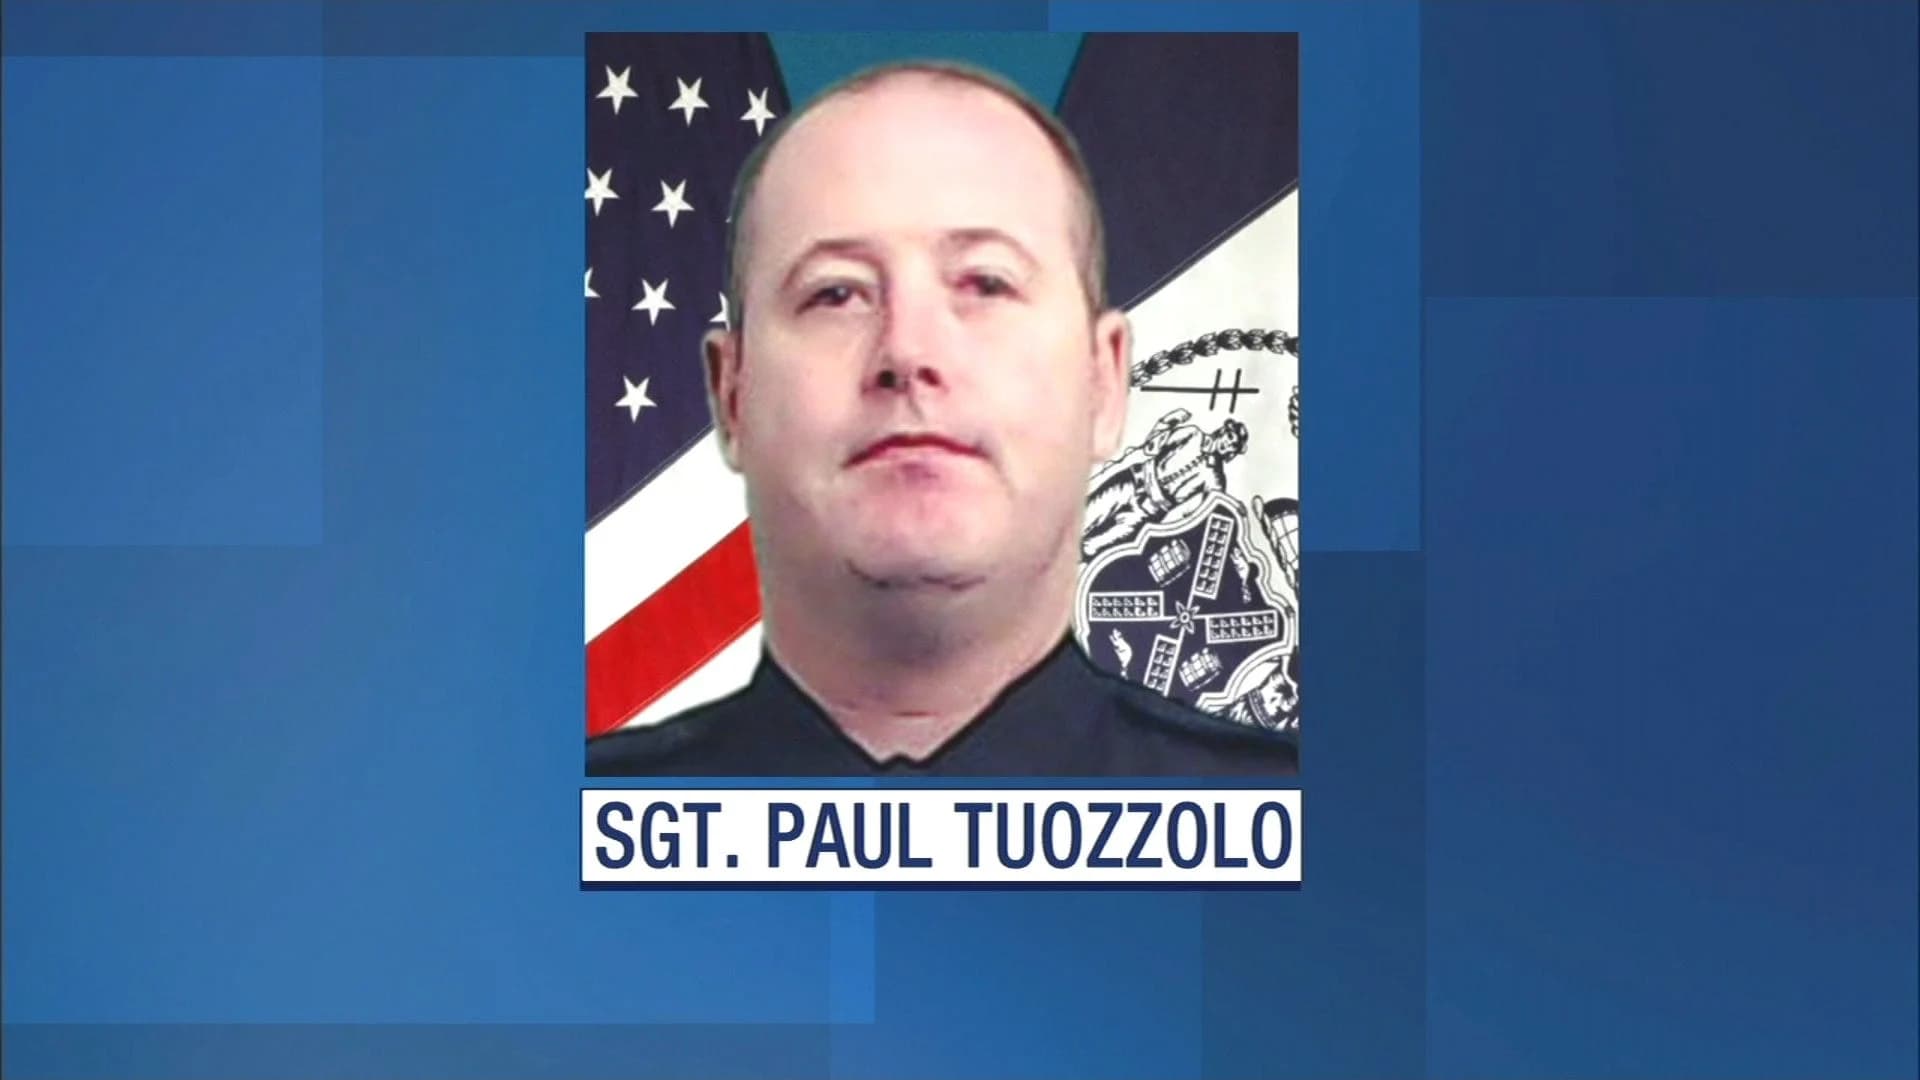 Board expected to vote on renaming park after fallen LI officer